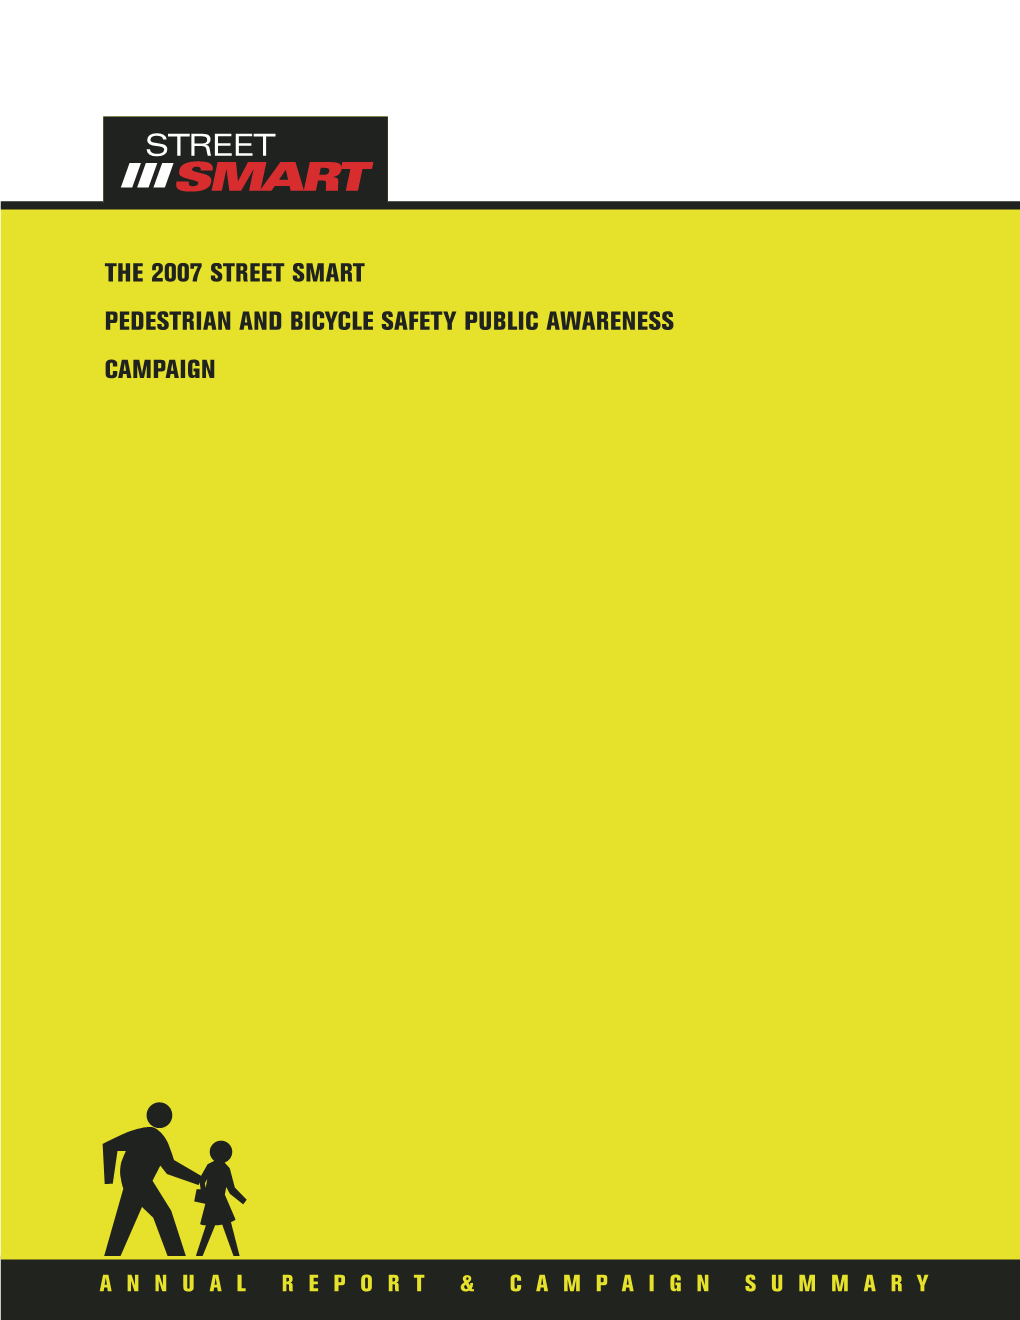 The 2007 Street Smart Pedestrian and Bicycle Safety Public Awareness Campaign